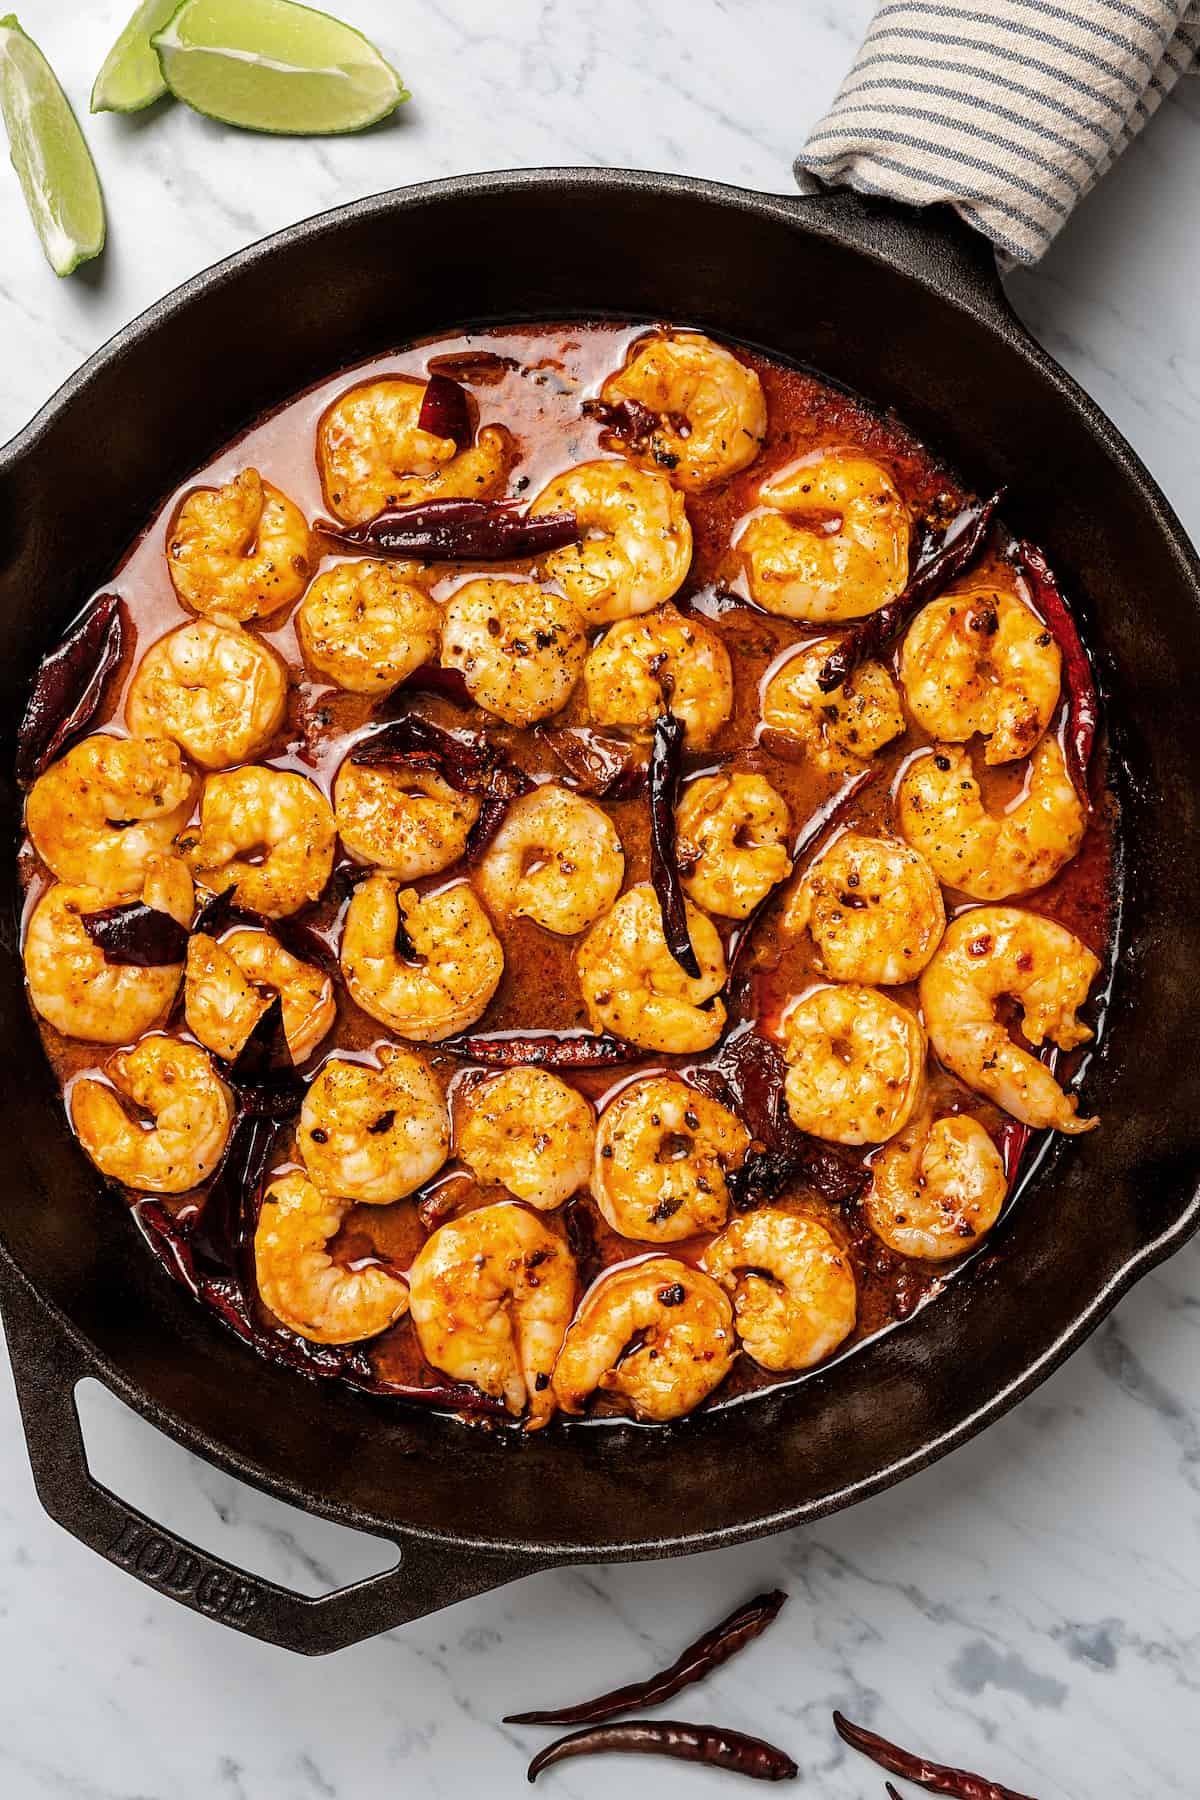 Mixing the shrimp and sauce in the pan.